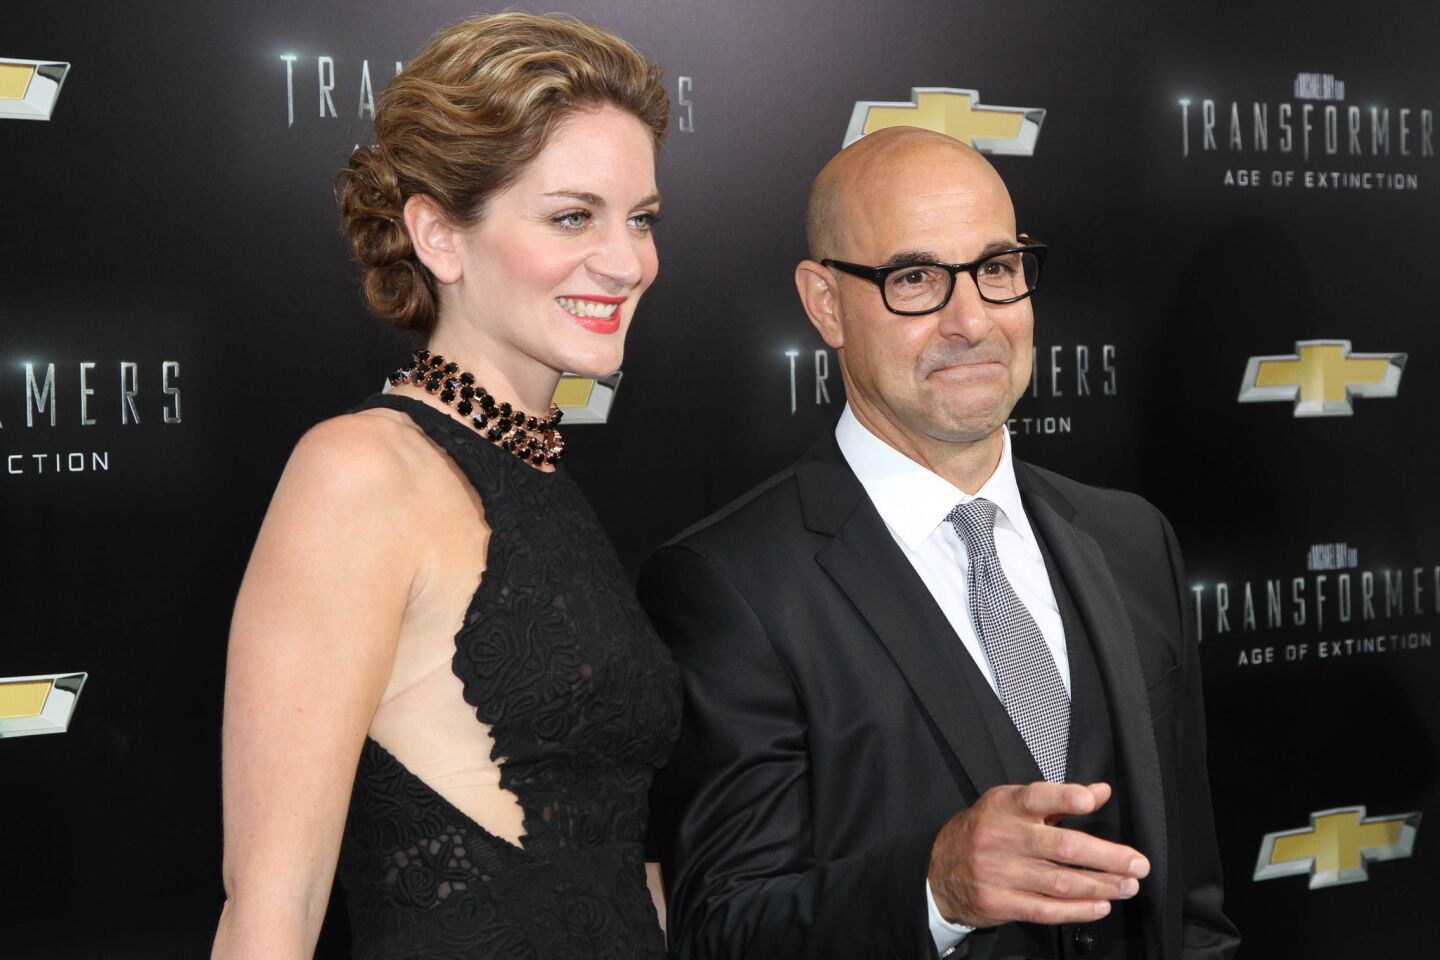 Actor Stanley Tucci is now a father to his first child with literary agent wife Felicity Blunt, a boy named Matteo Oliver. Tucci is already a father of three kids with his late wife, Kate Spath-Tucci, who died in 2009 after battling breast cancer.